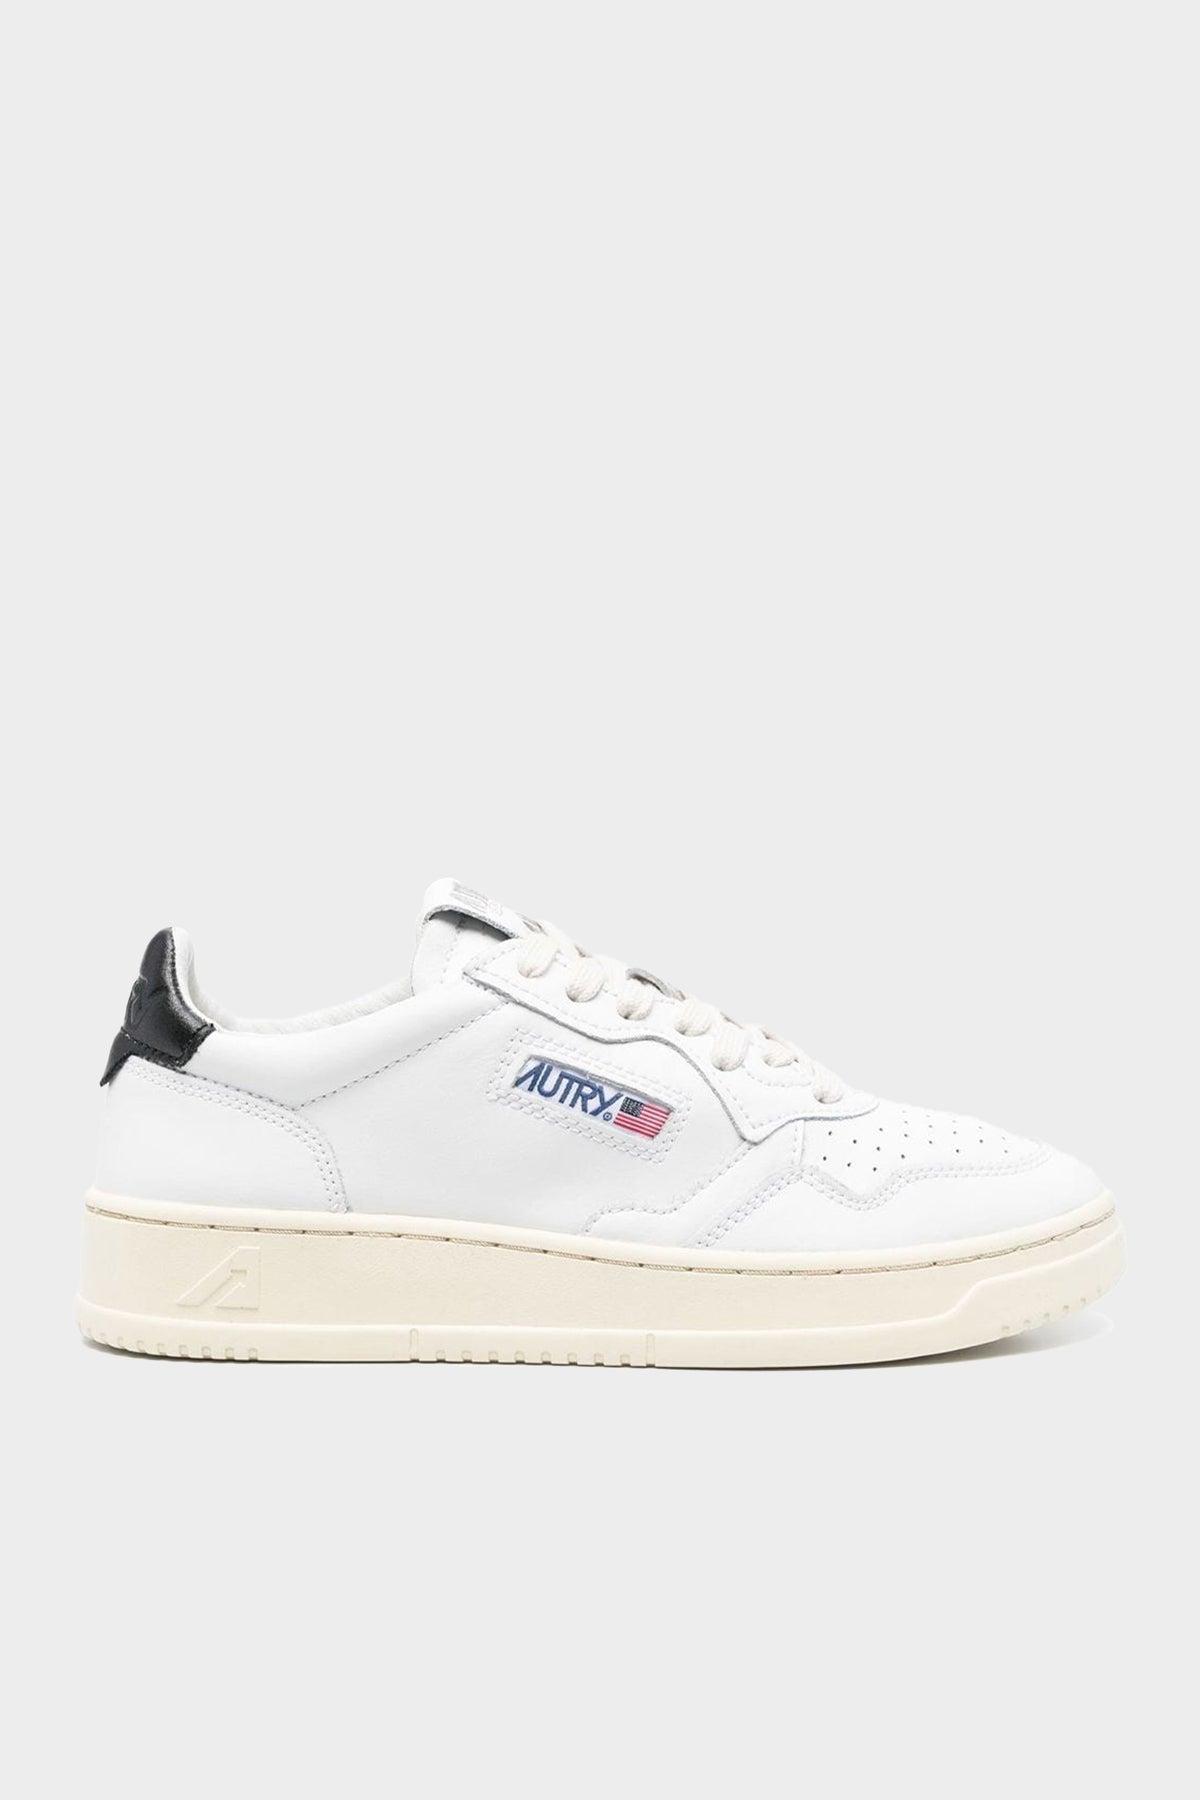 Autry Medalist Low Leather Sneaker In White Black | Lyst